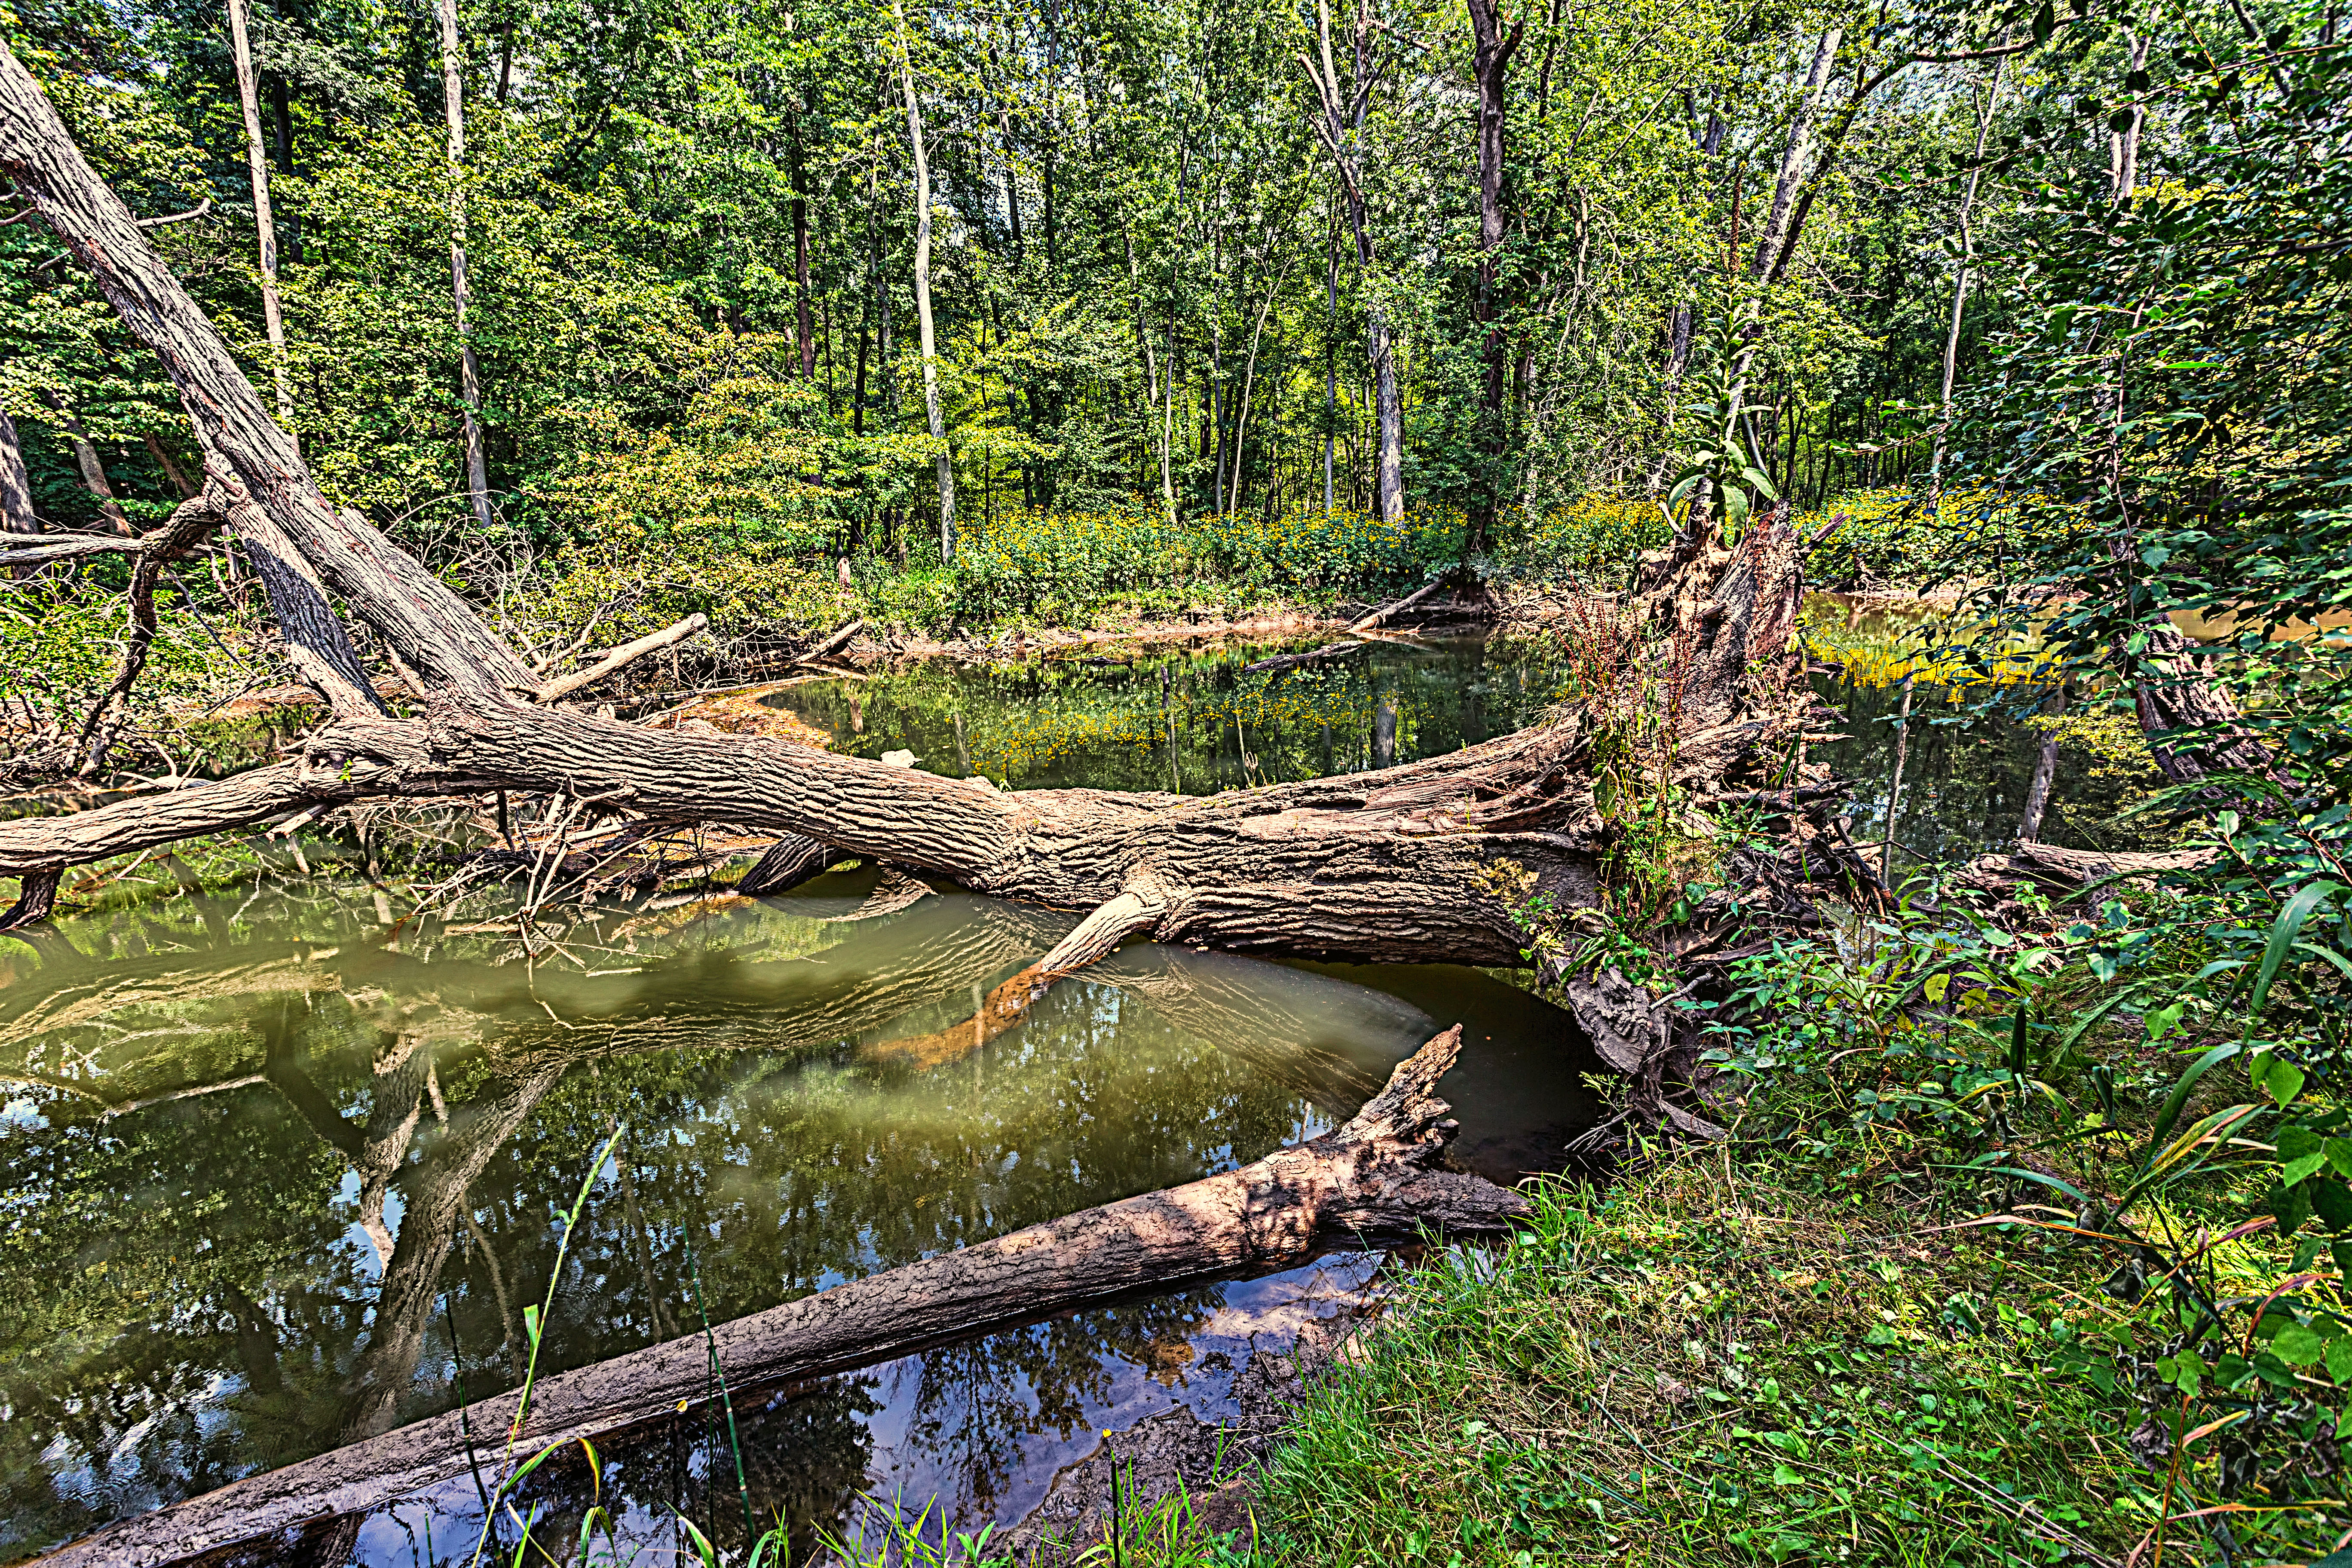 Uprooted Tree in Still River | Edward Byrne: Photography Journal, 2013